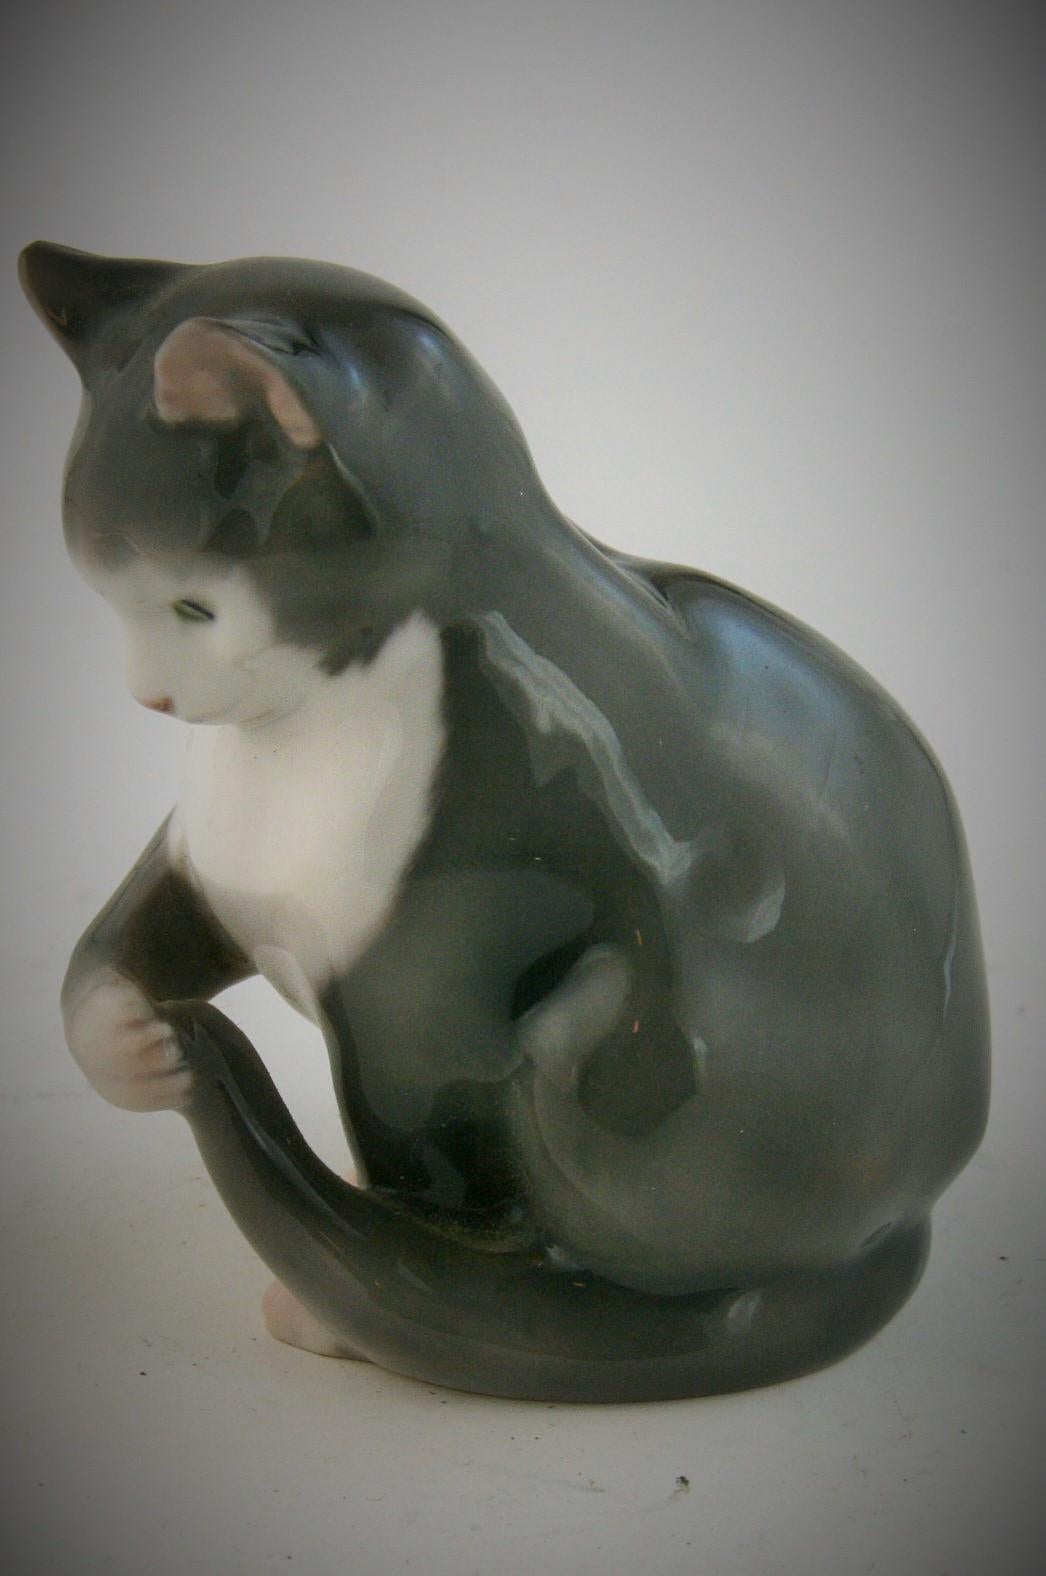 8-253 B and G Danish miniature porcelain cat.
Makers mark with 3  towers of Denmark on bottom.